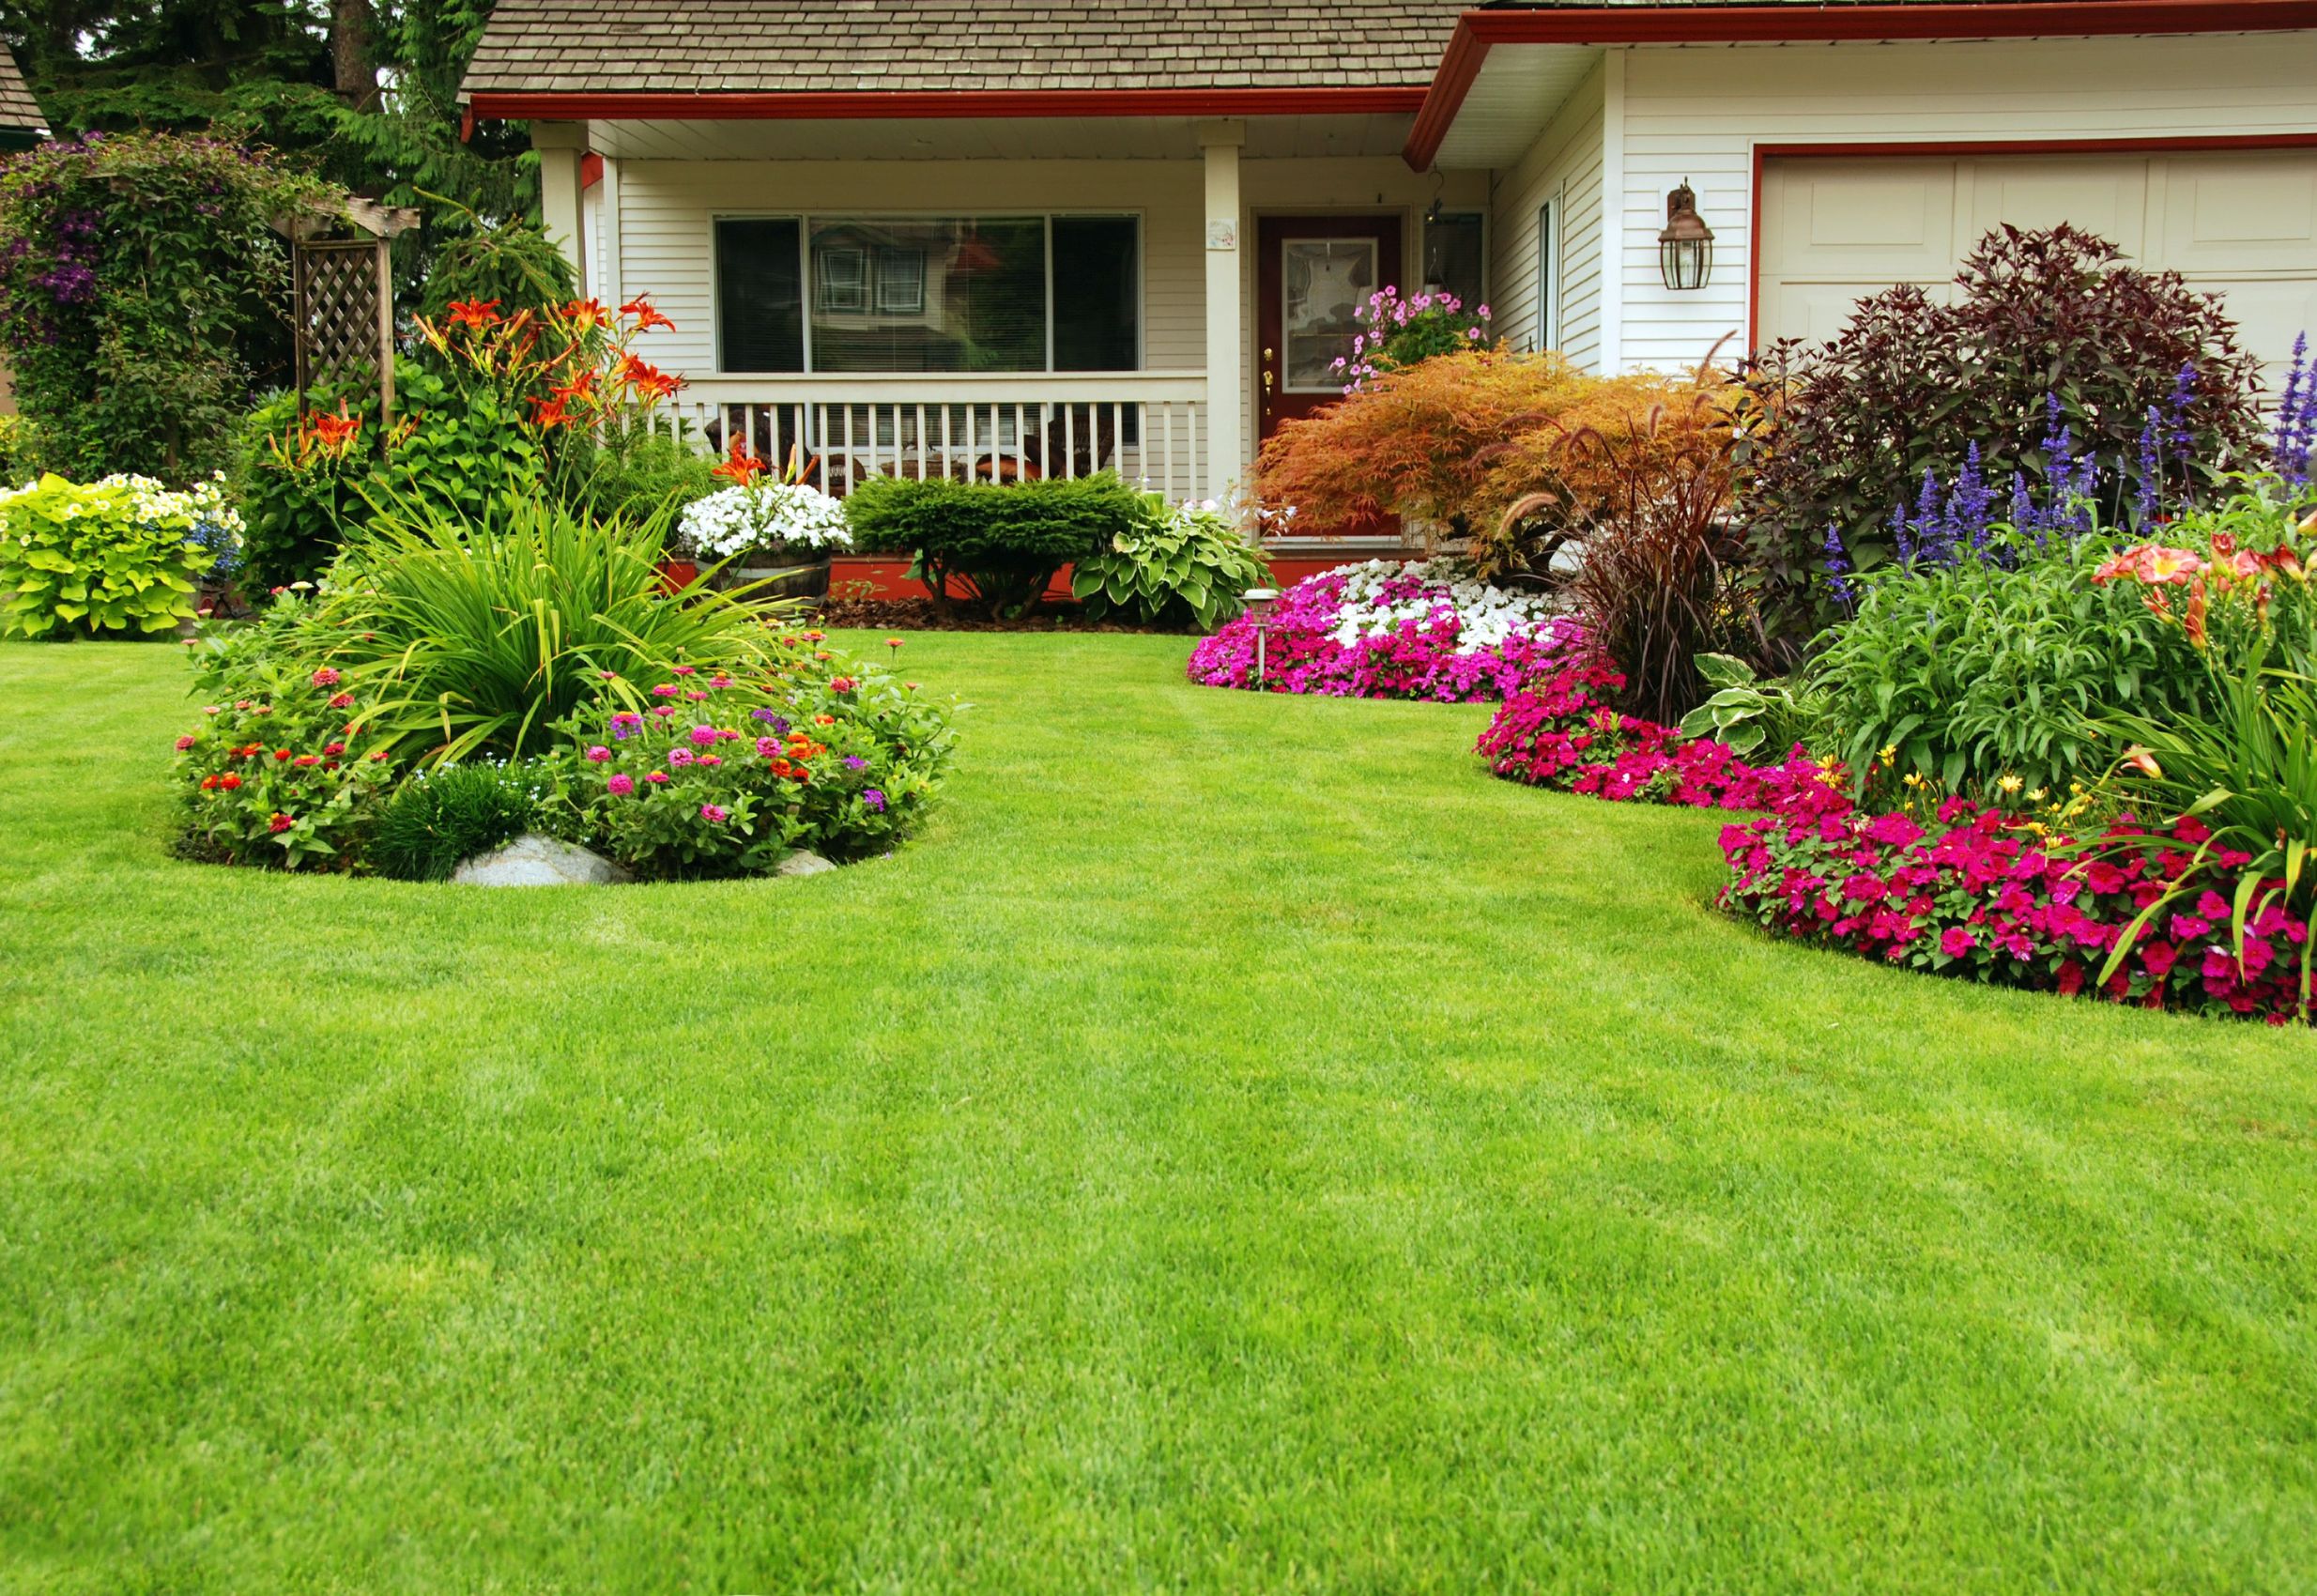 Does Your Lake Mary Home Need Residential Landscaping Services?